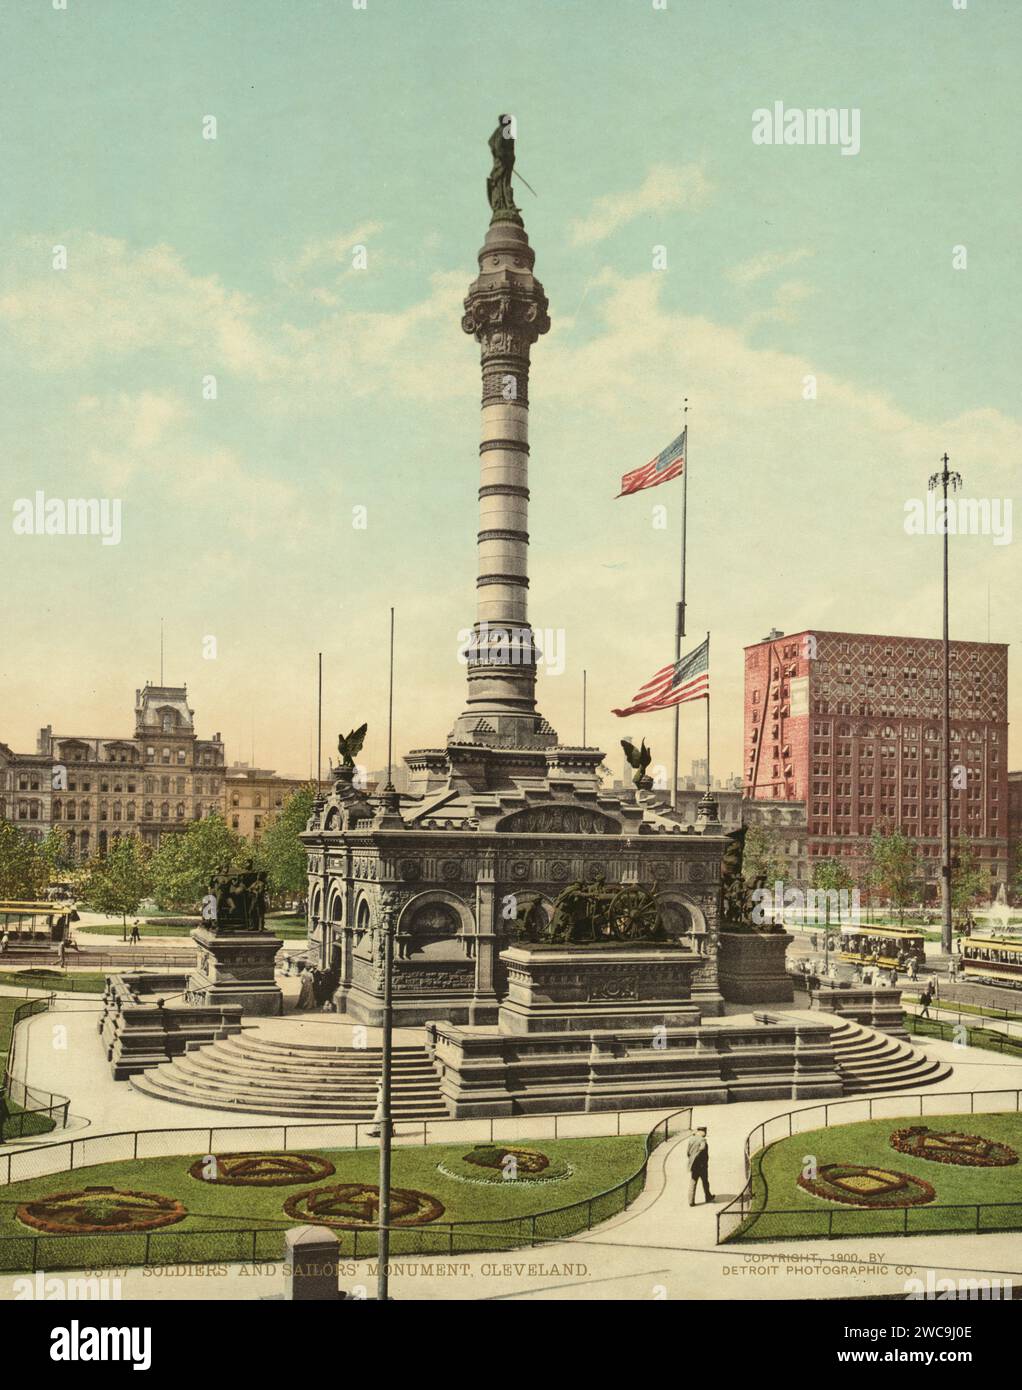 Cuyahoga County Soldiers' and Sailors' Monument, Cleveland, Cuyahoga County, Ohio 1900. Stockfoto